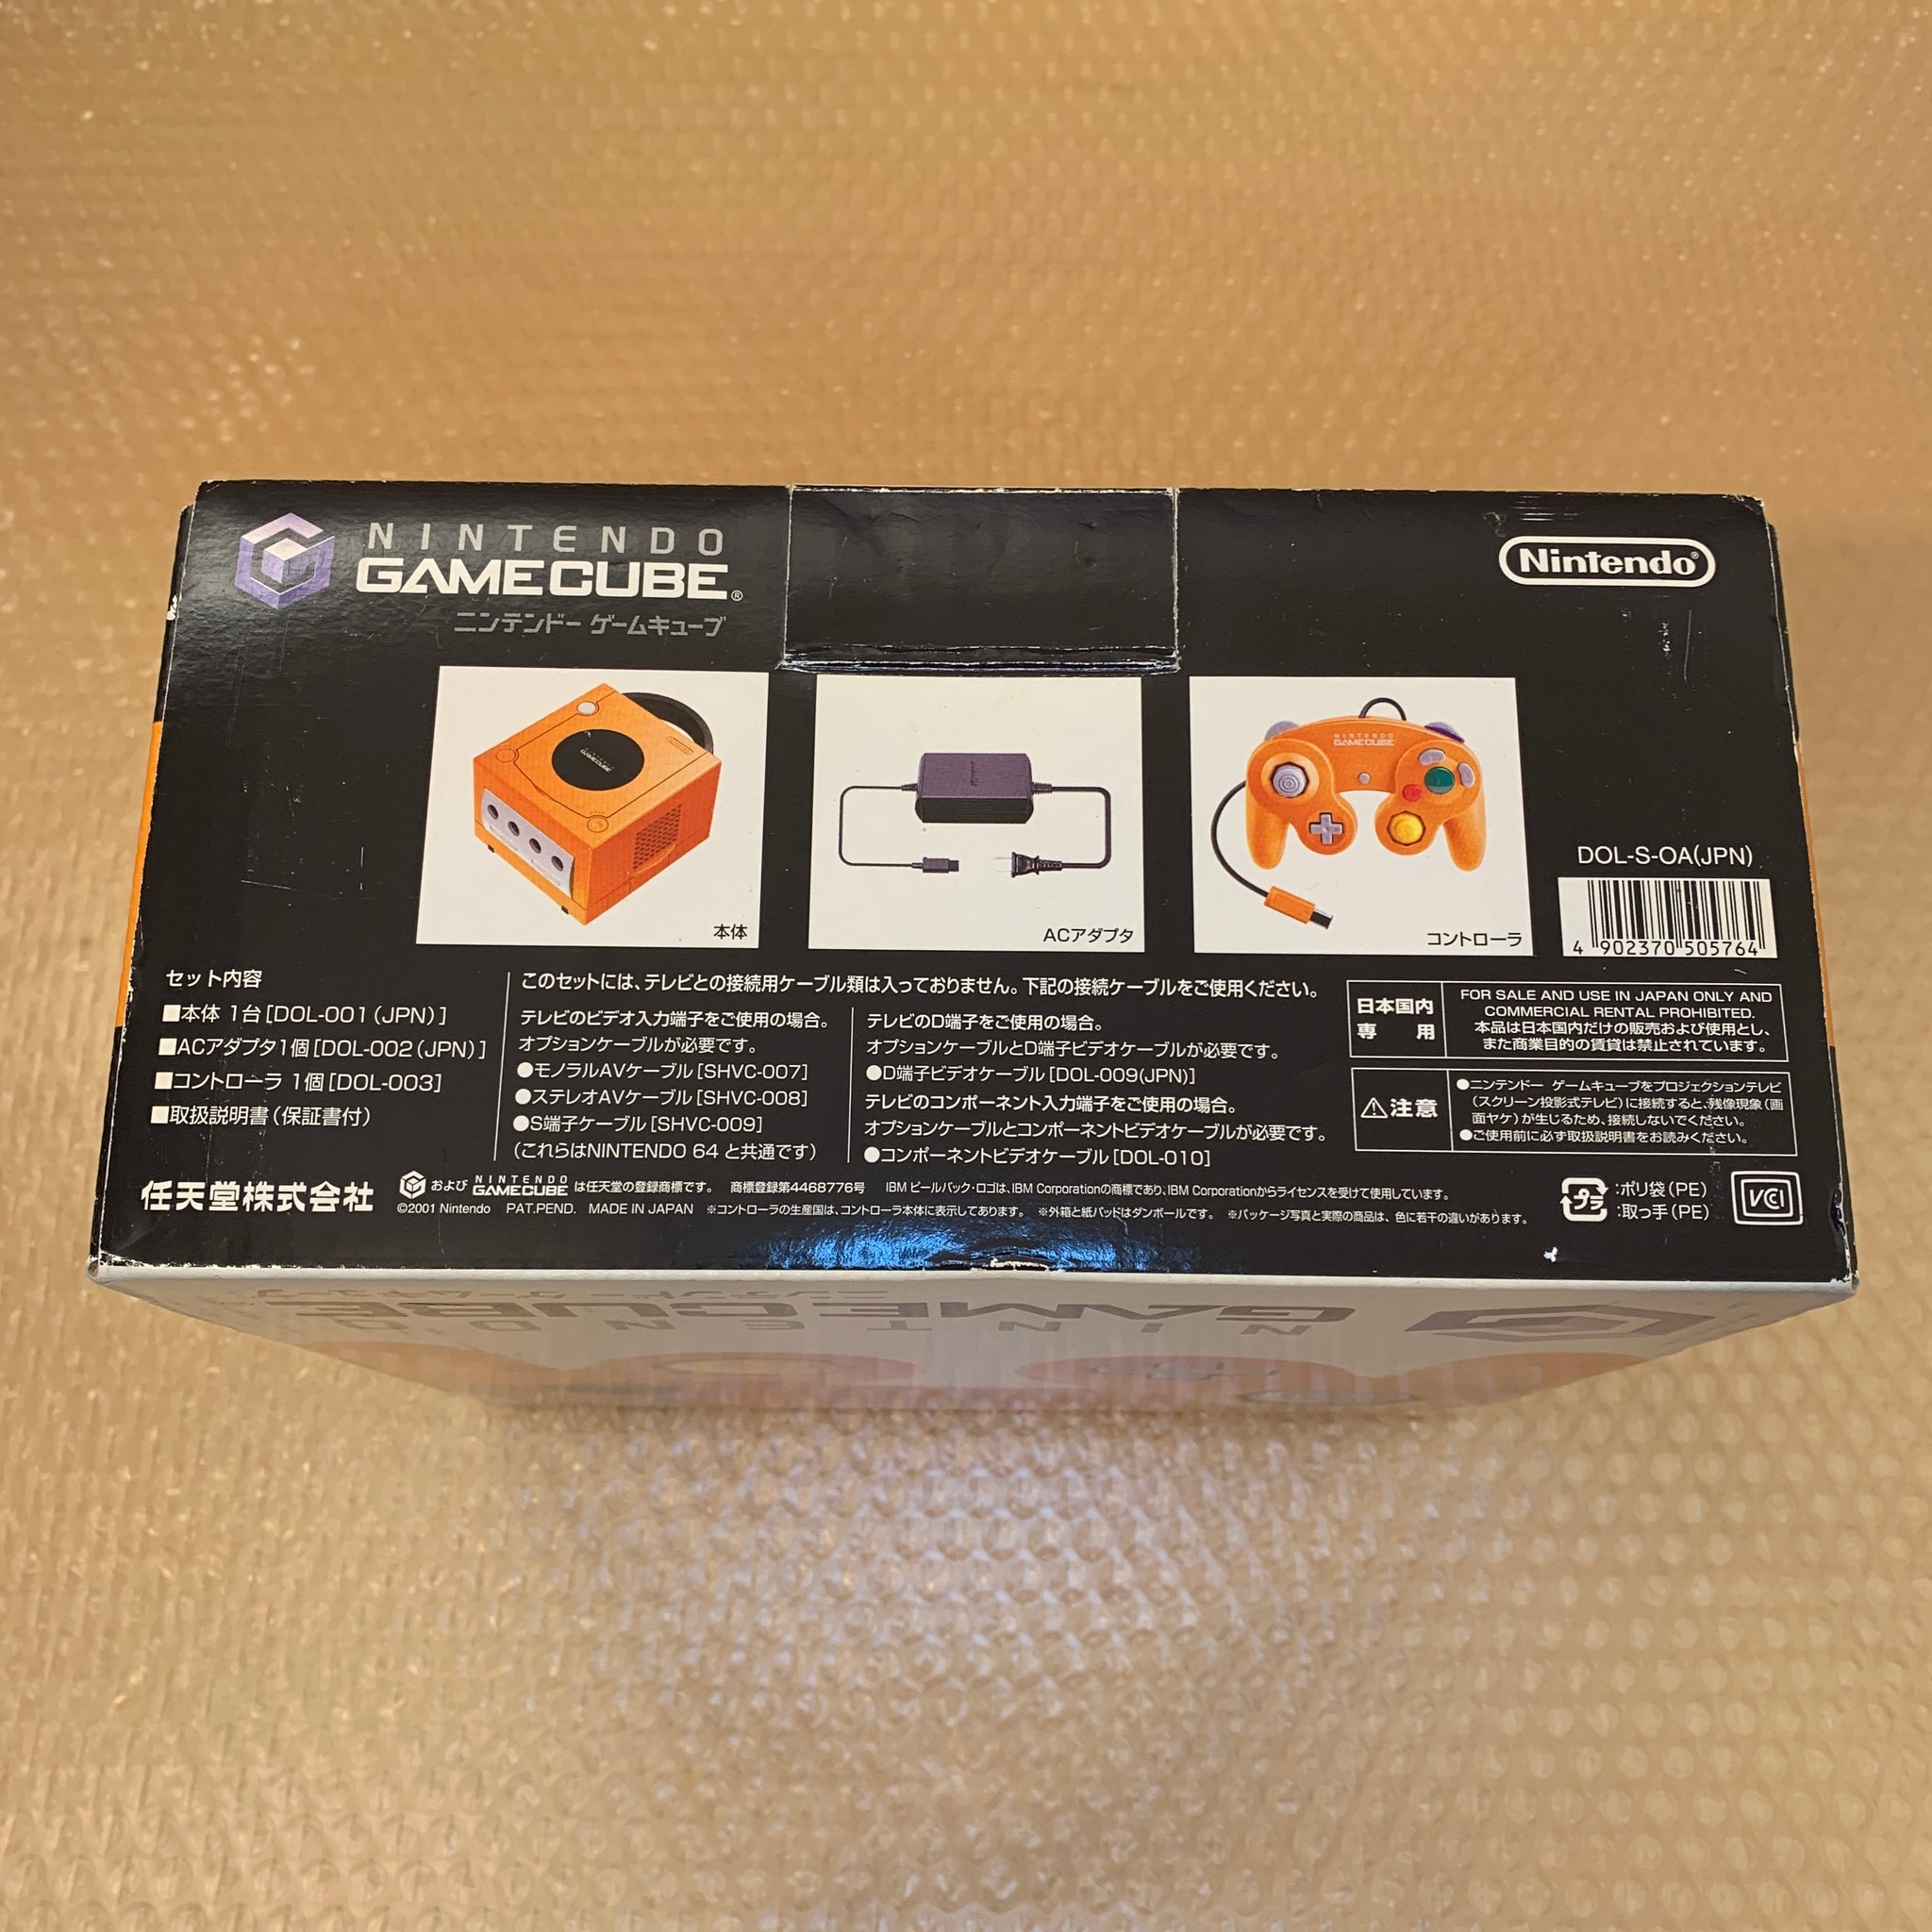 Gamecube in box with GC Loader and Pokemon Faceplate - RetroAsia